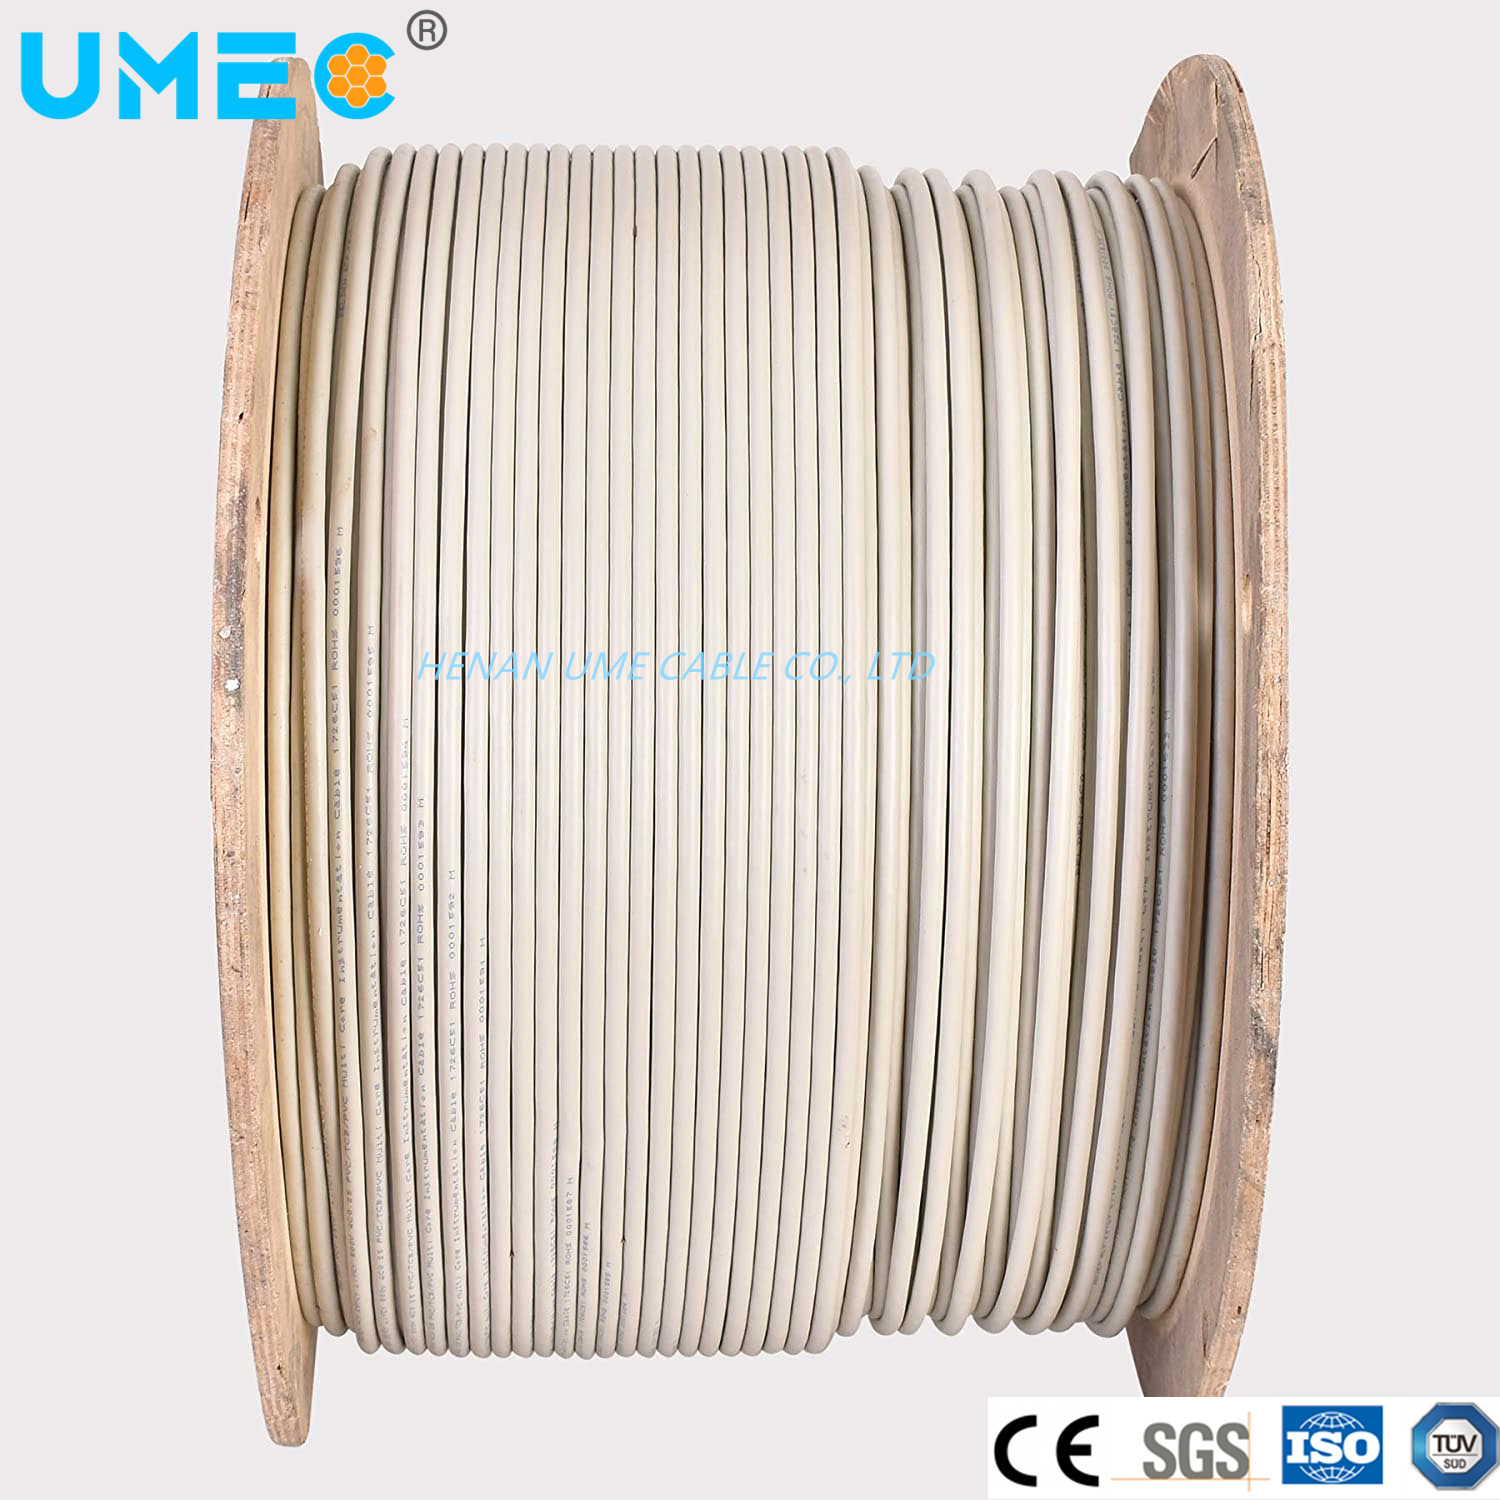 4X1.5mm Copper Conductor PVC Insulated Control Cable Liycy Cable